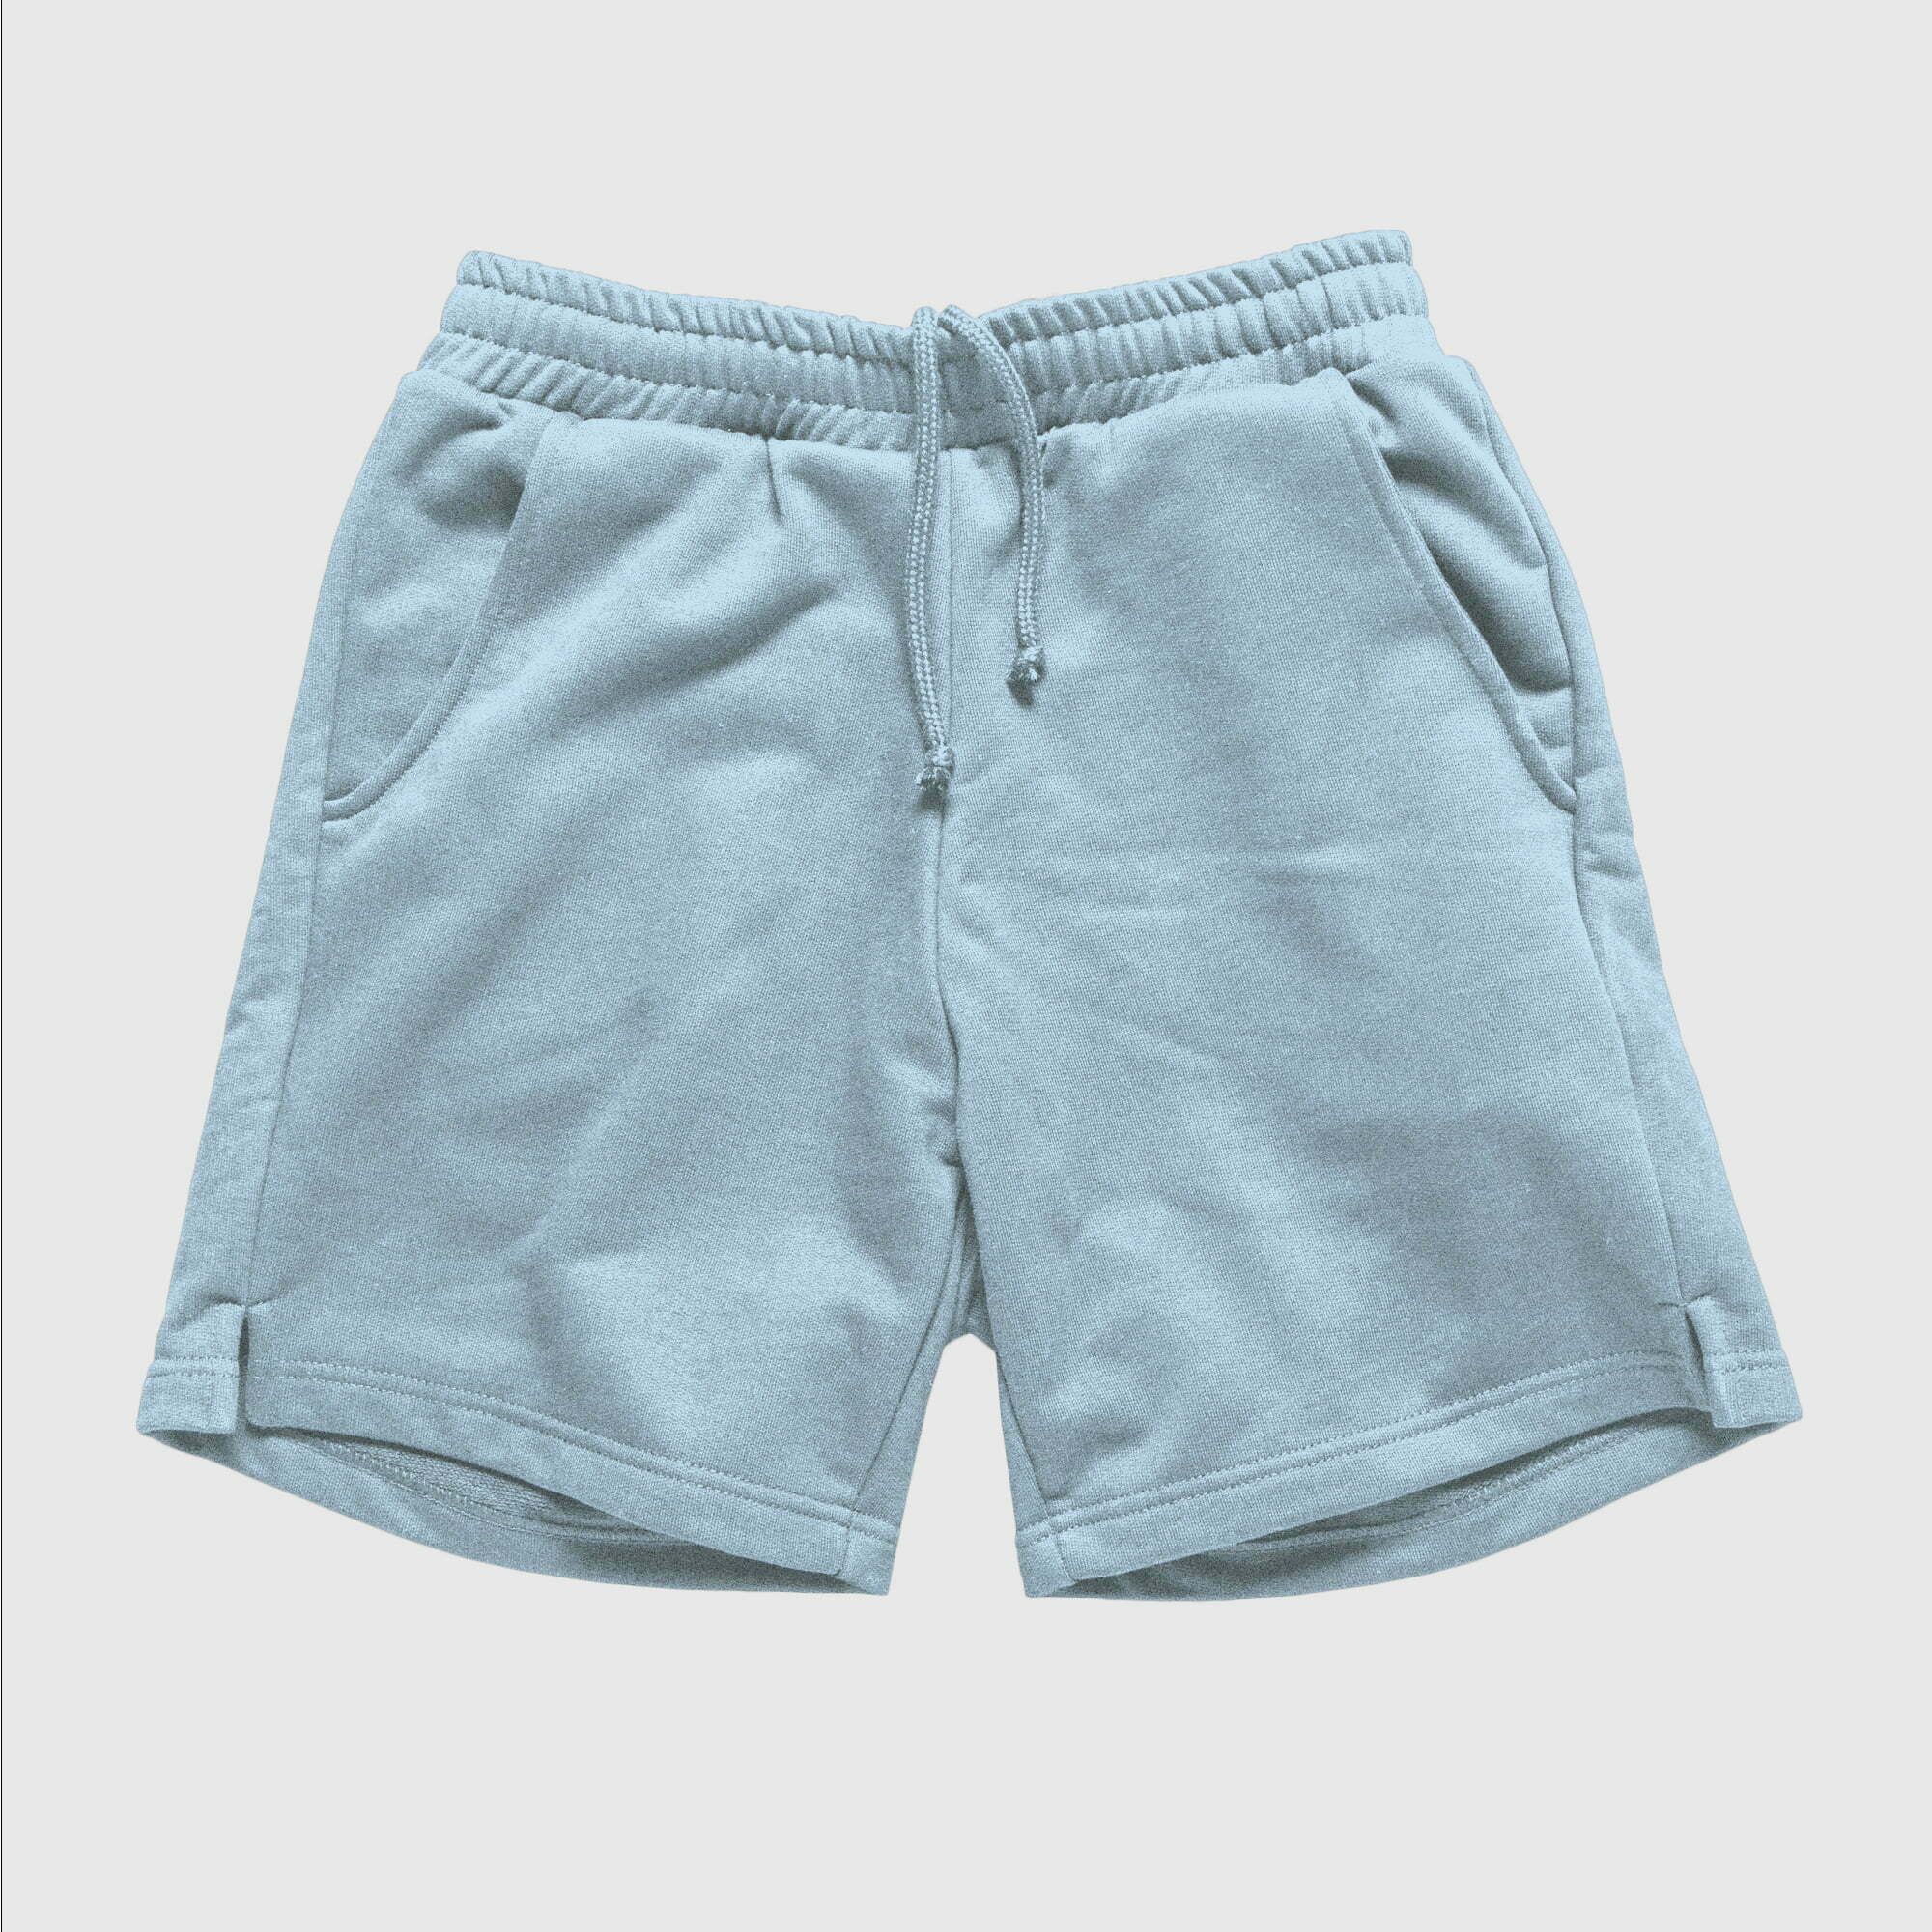 BLANK SHORTS BABY BLUE - Clothing Manufacturers Portugal - ASBX